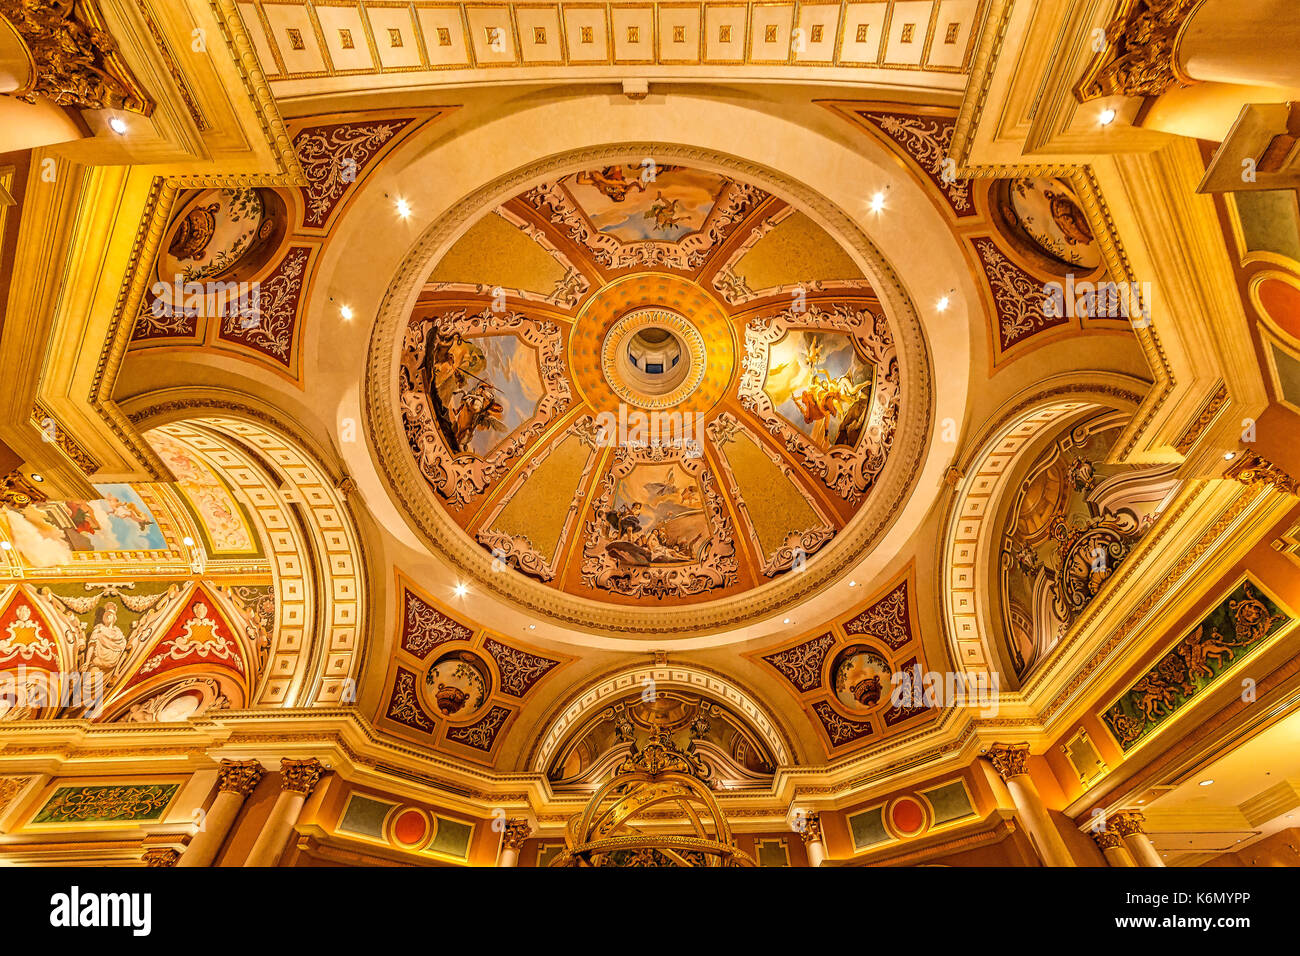 Venetian Hotel Lobby Ceiling - Ceiling art and architectural details at the Venetian Hotel and Casino in Las Vegas, Nevada. Stock Photo